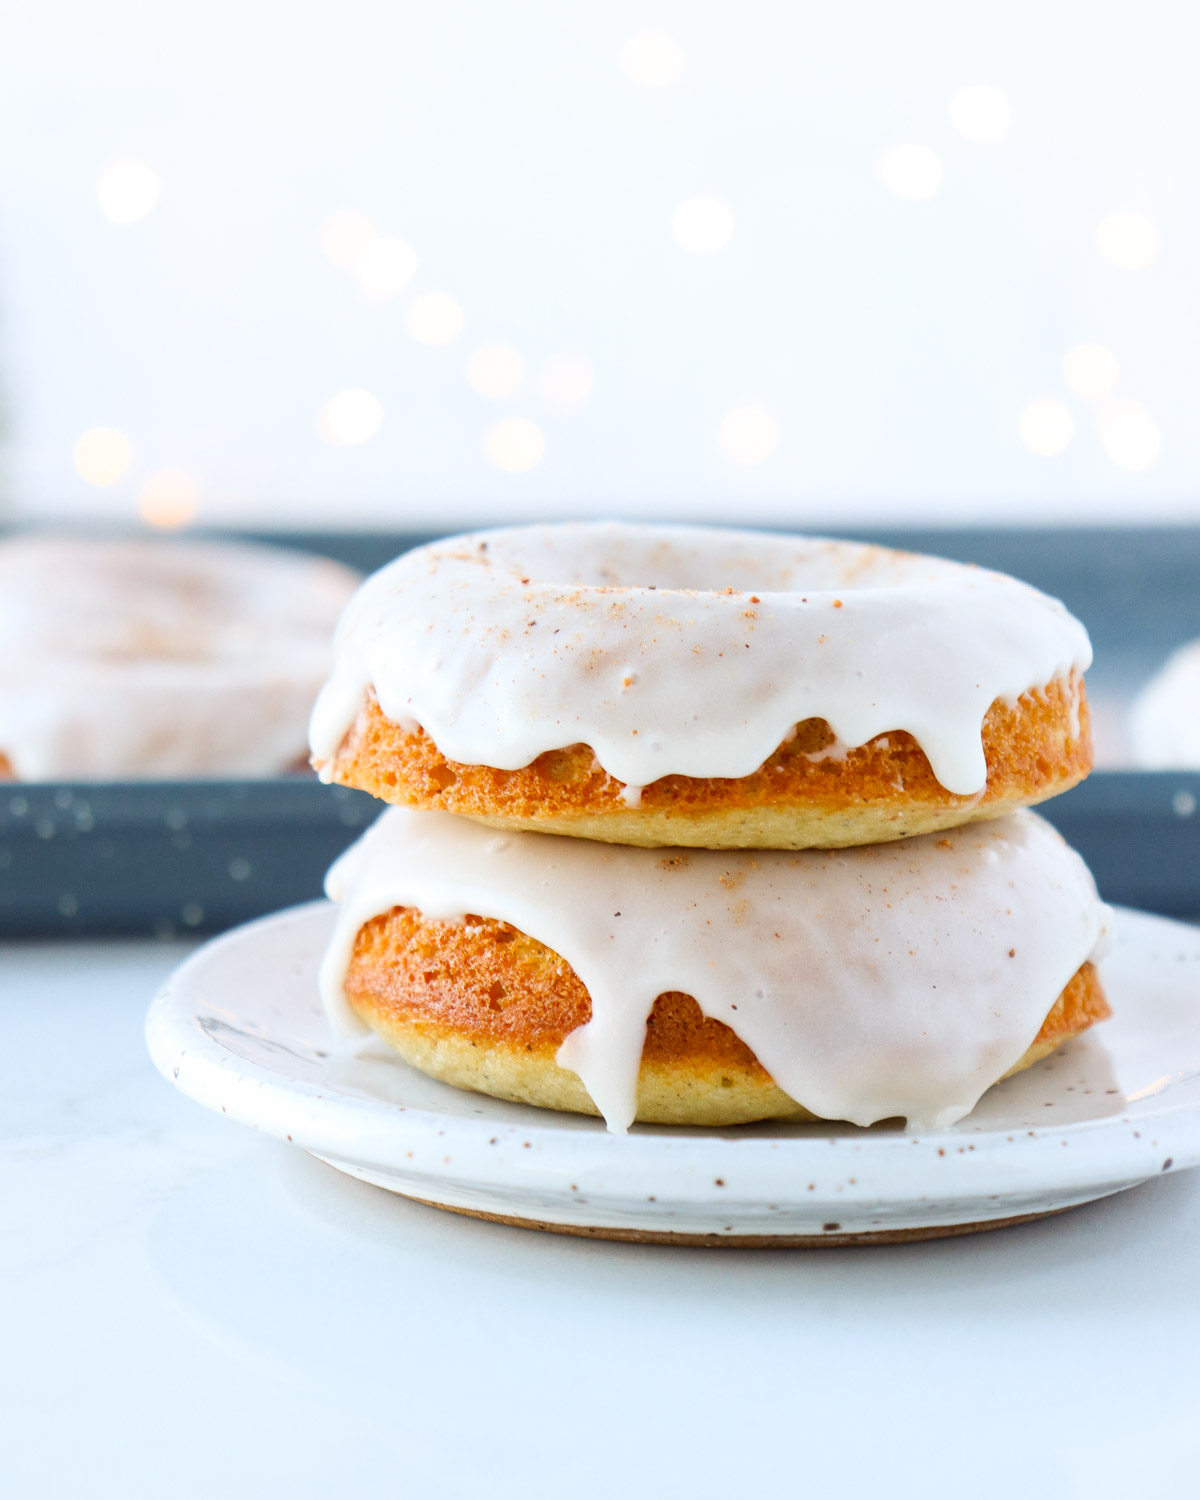 Two donuts with glaze on top stacked on a white plate.